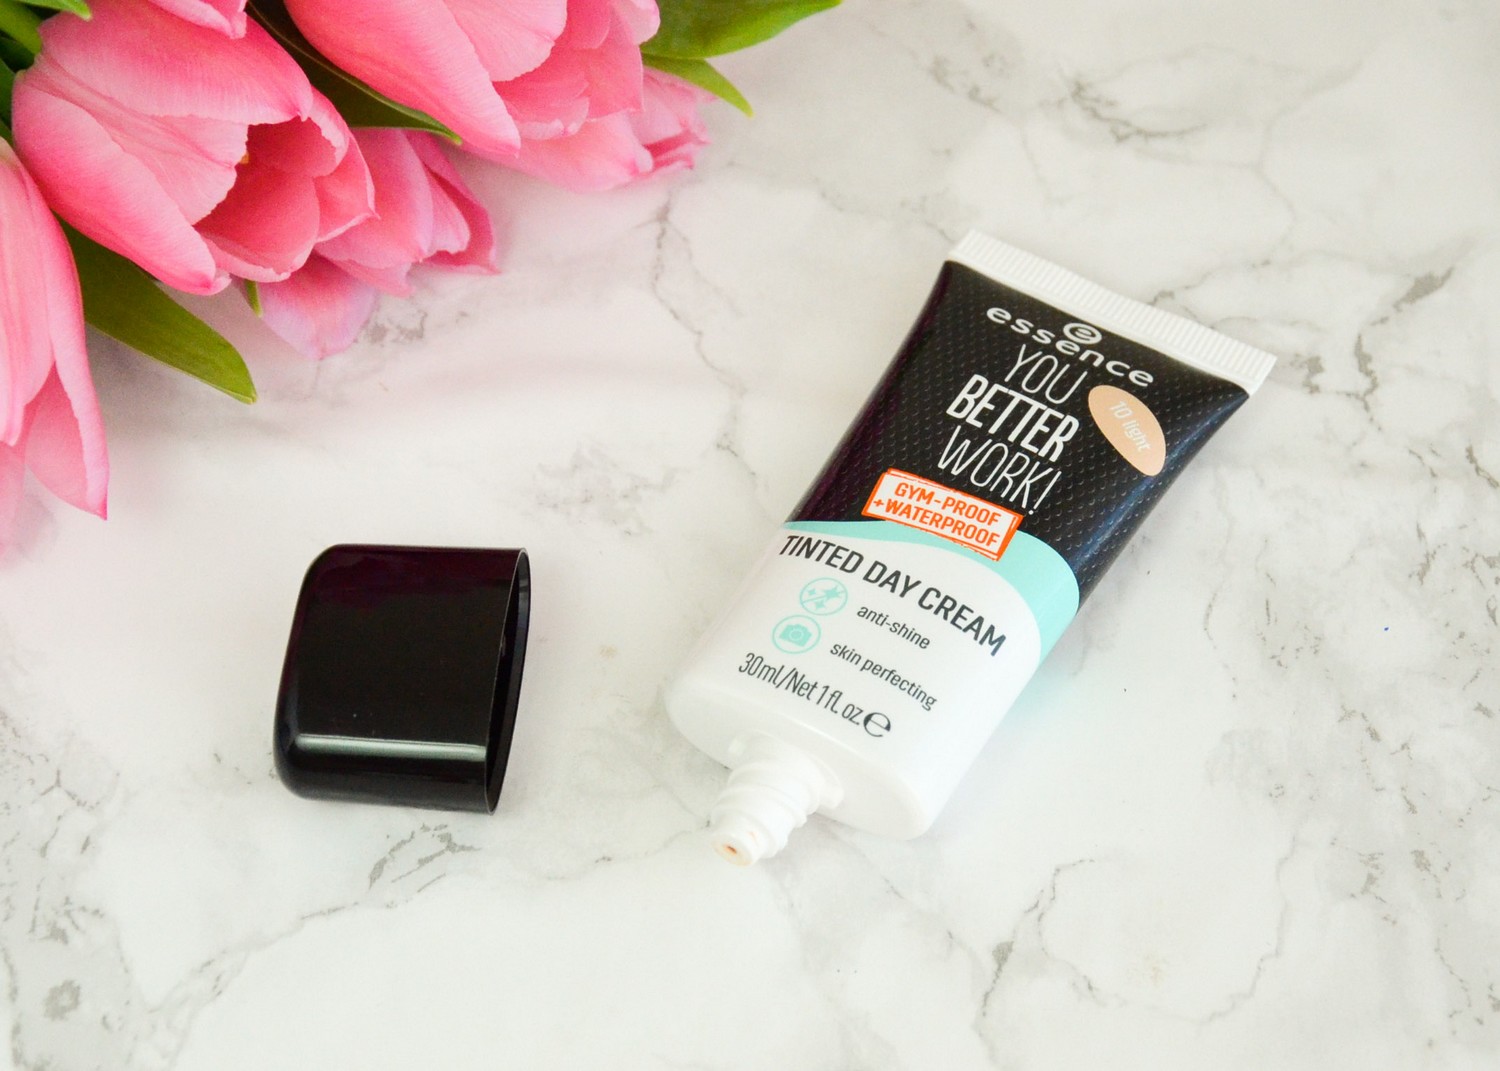 Essence You Better Work! Tinted Day Cream (Gym and Waterproof)